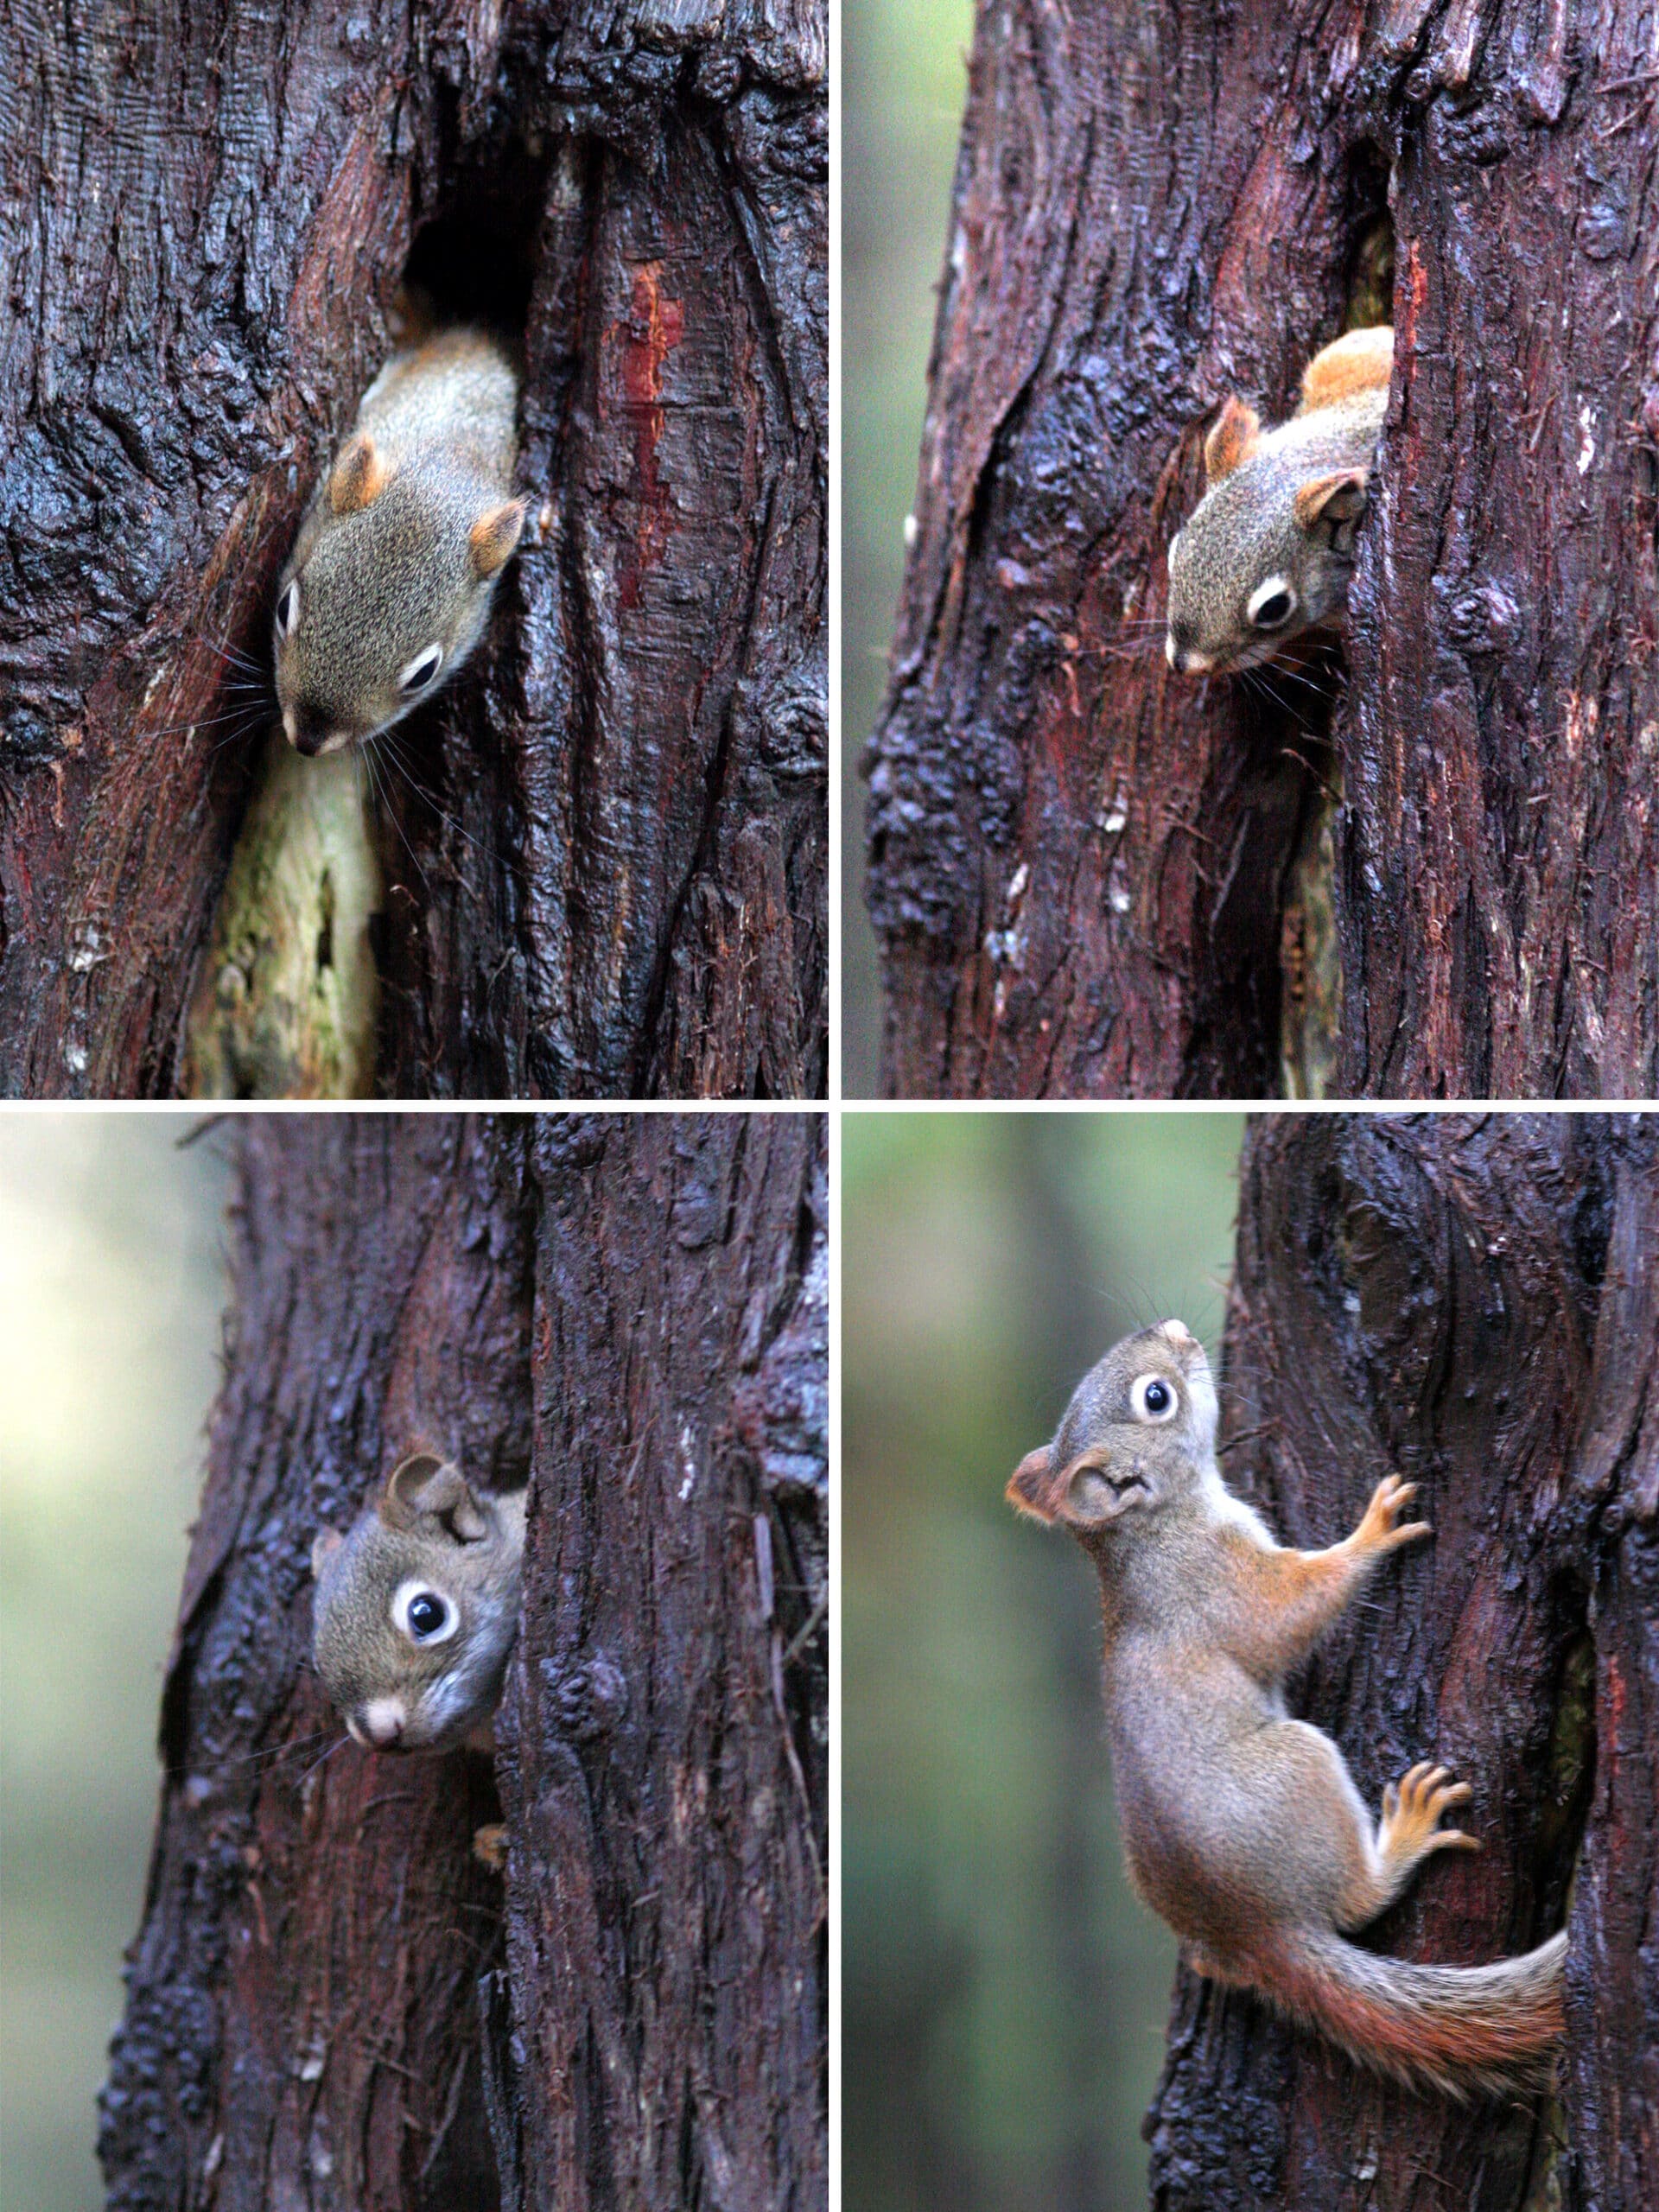 4 part image showing a red squirrel poking his head out of a hole in a tree, then posing on the tree.